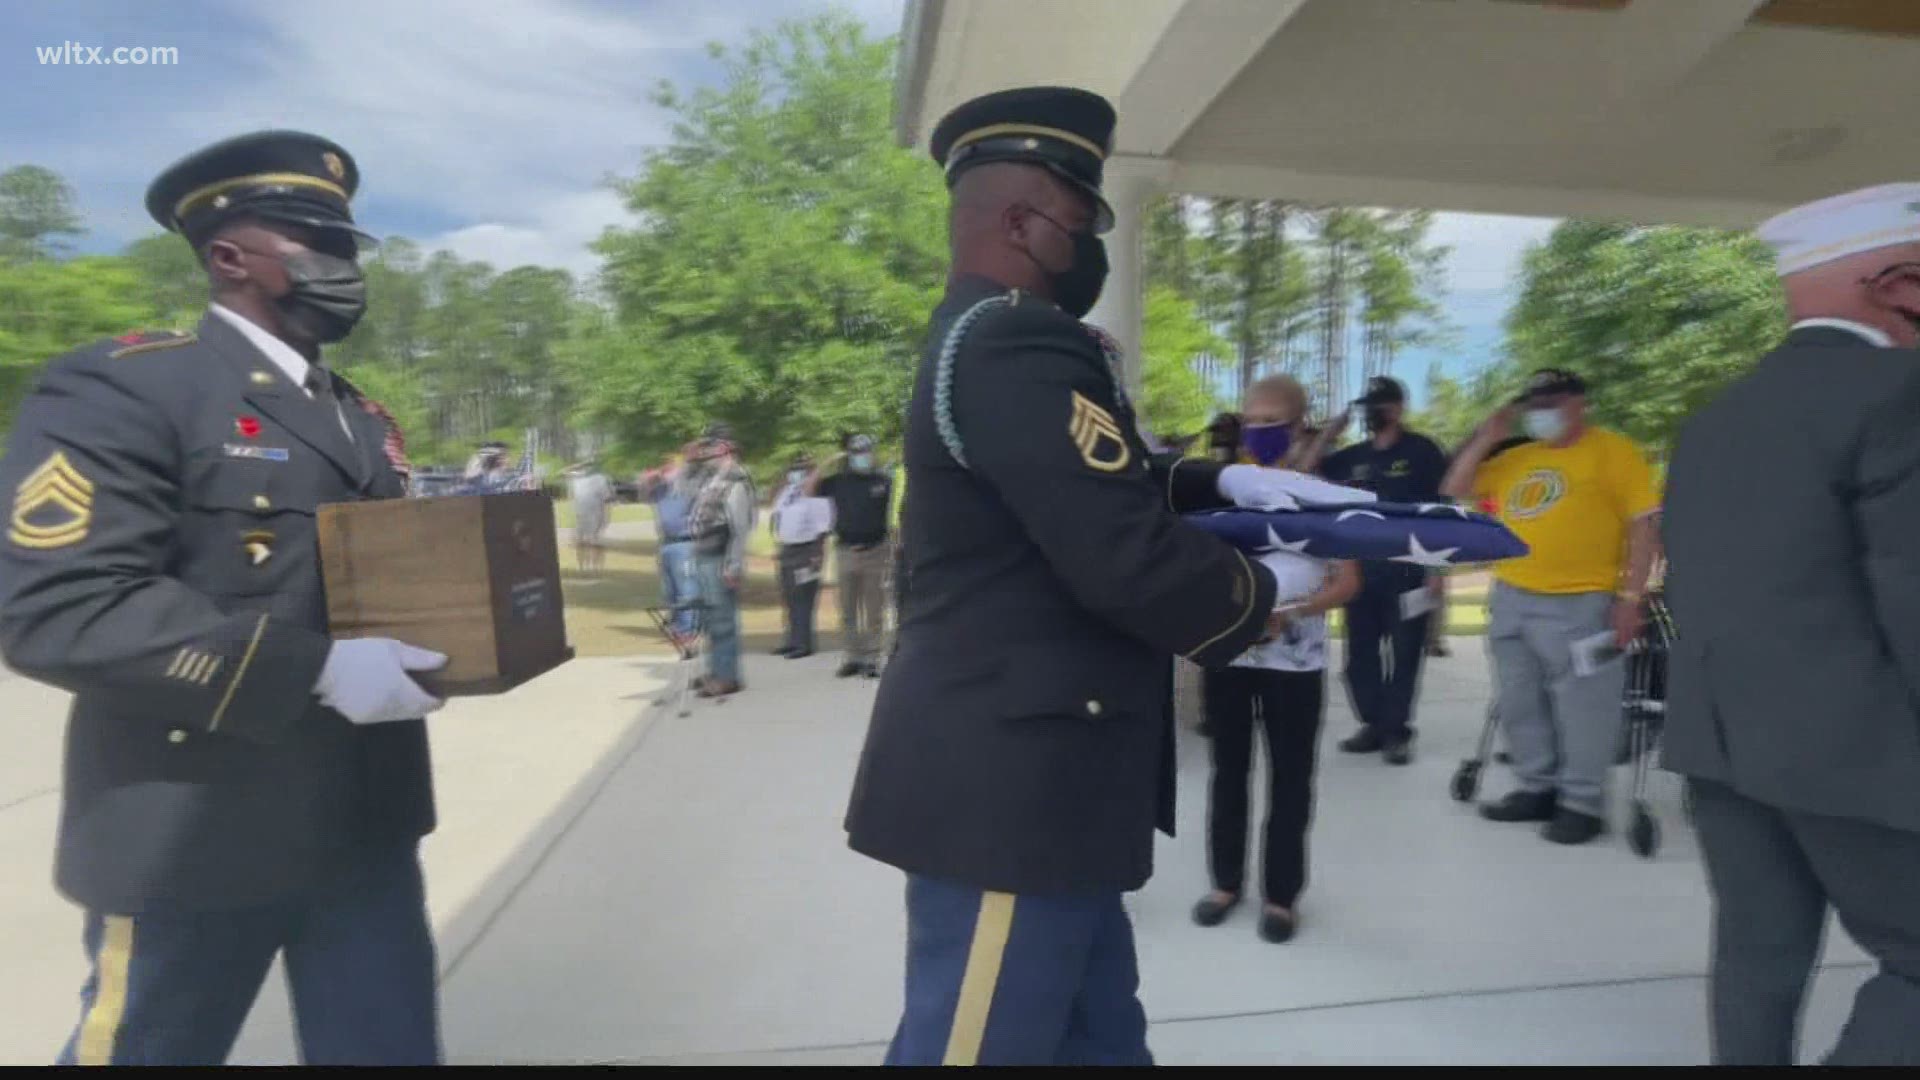 Veterans who have passed away without loved ones to remember them, were honored with a funeral service at Fort Jackson National Cemetery.